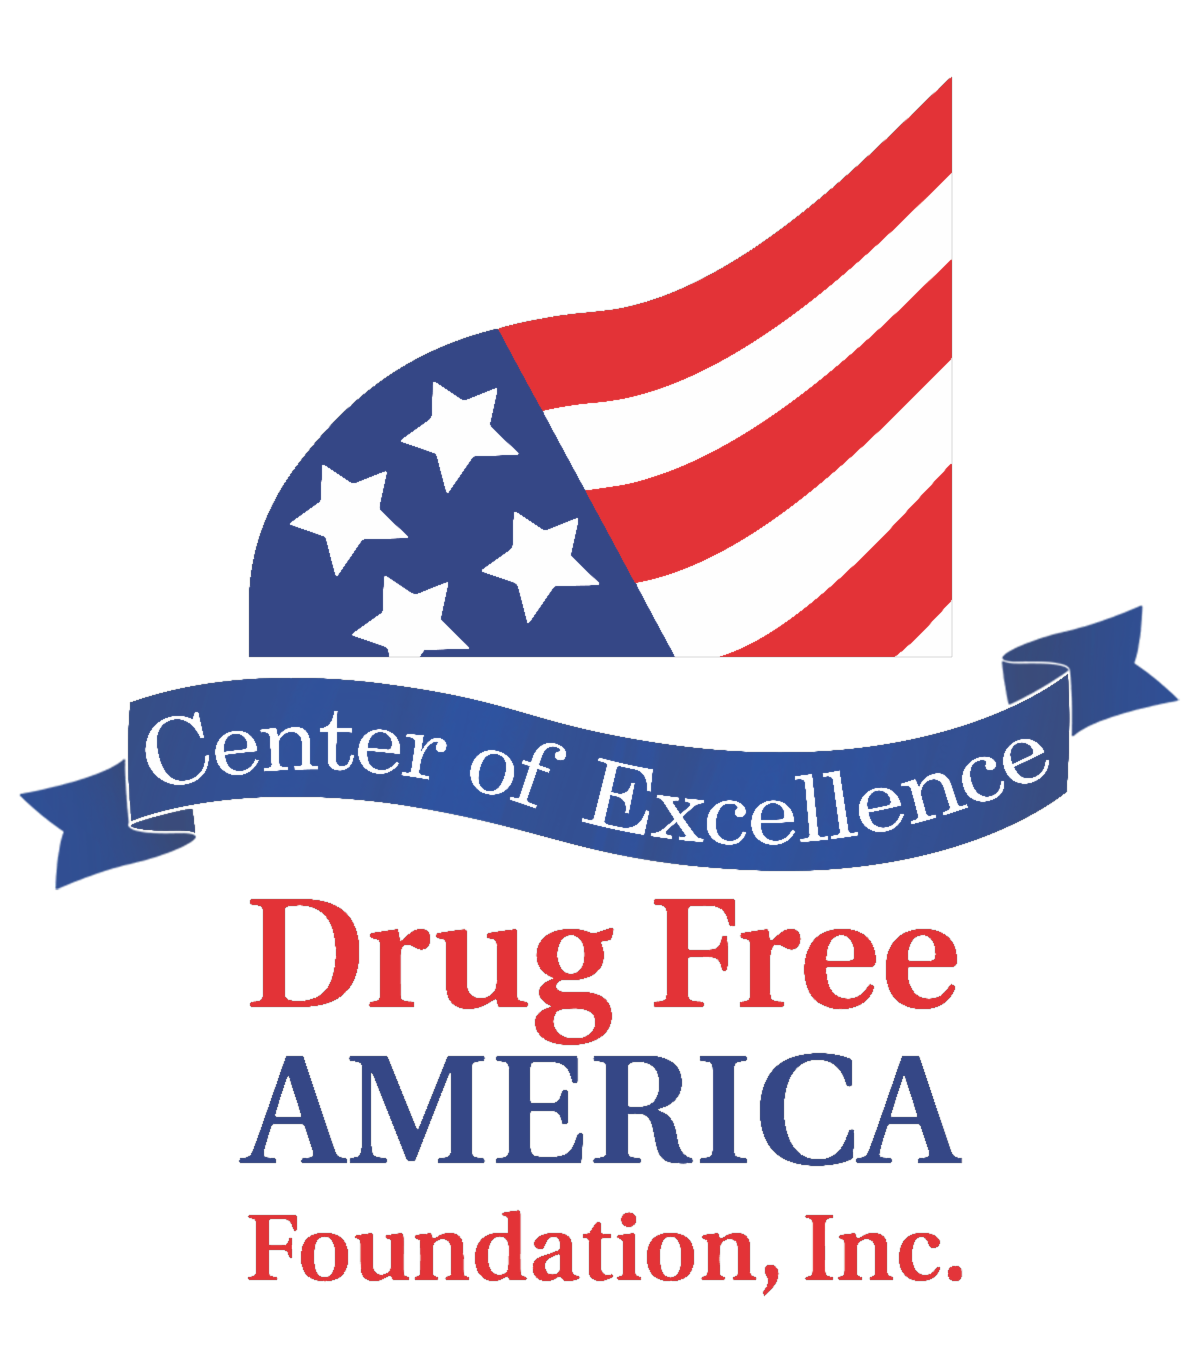 Summer’s Here: Resources from Drug Free America Foundation